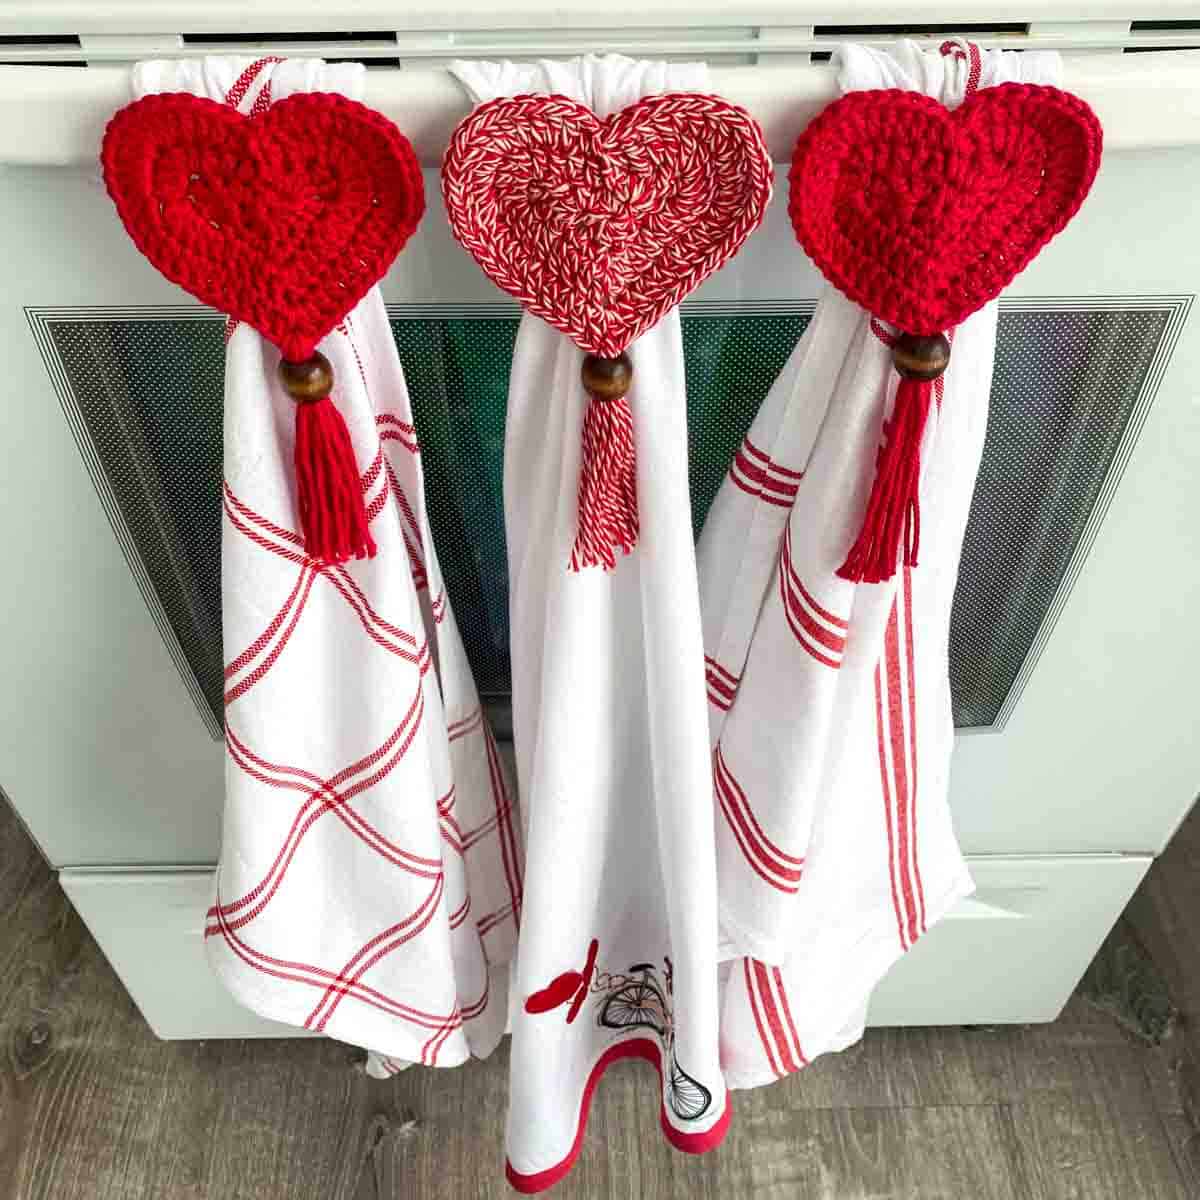 Crocheted FULL Towel Valentine Be Mine Heart Kitchen towel with White Yarn 